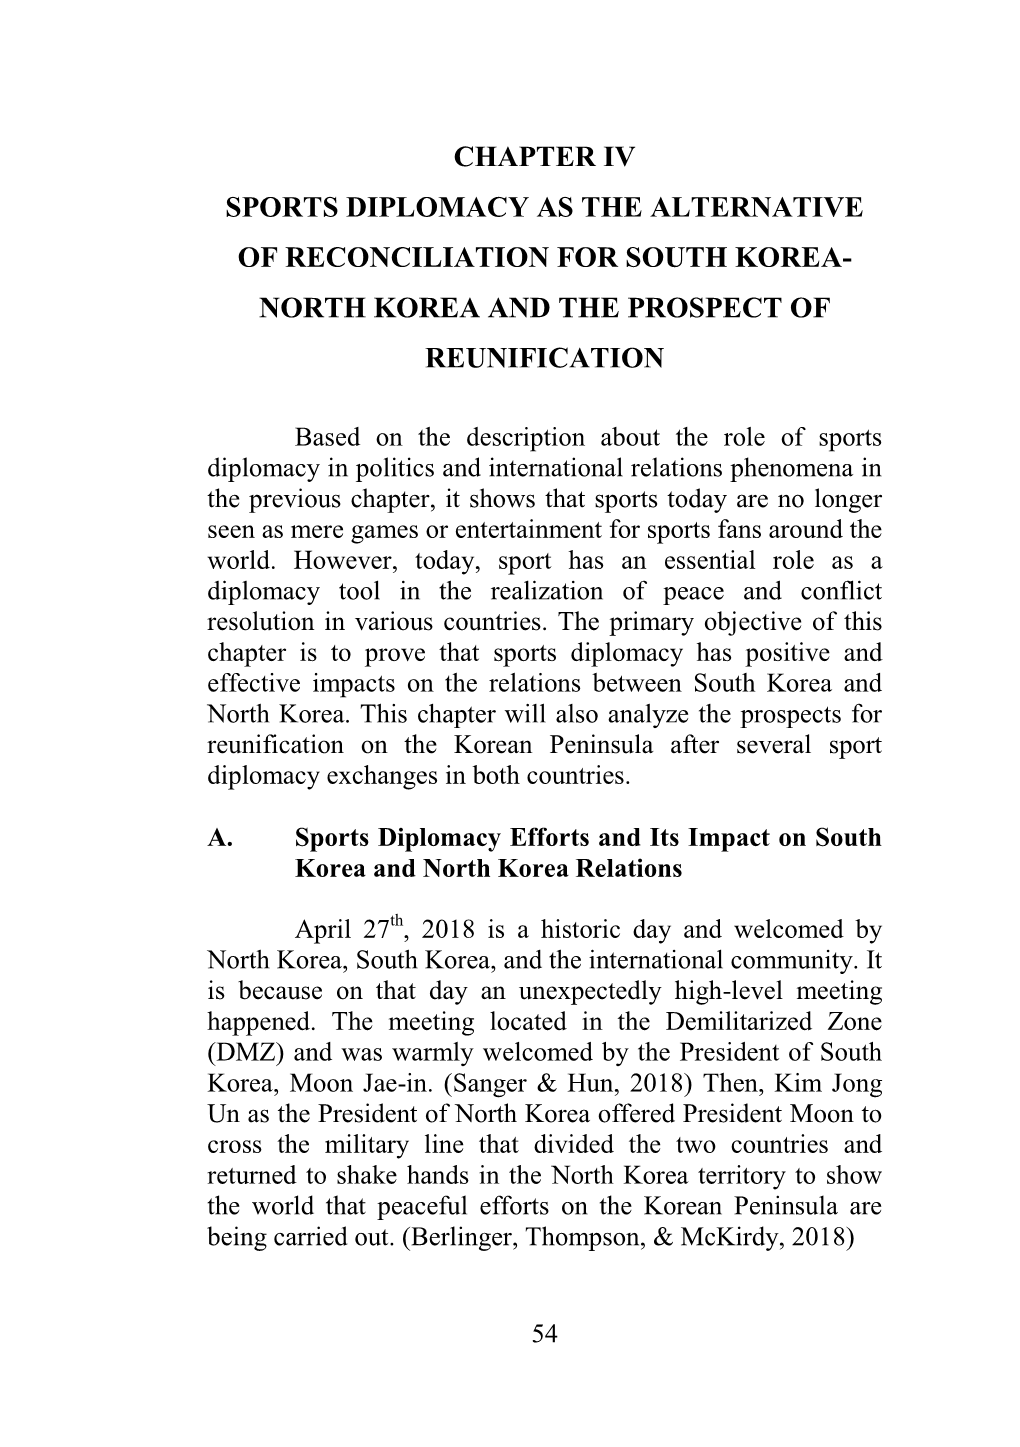 Chapter Iv Sports Diplomacy As the Alternative of Reconciliation for South Korea- North Korea and the Prospect of Reunification